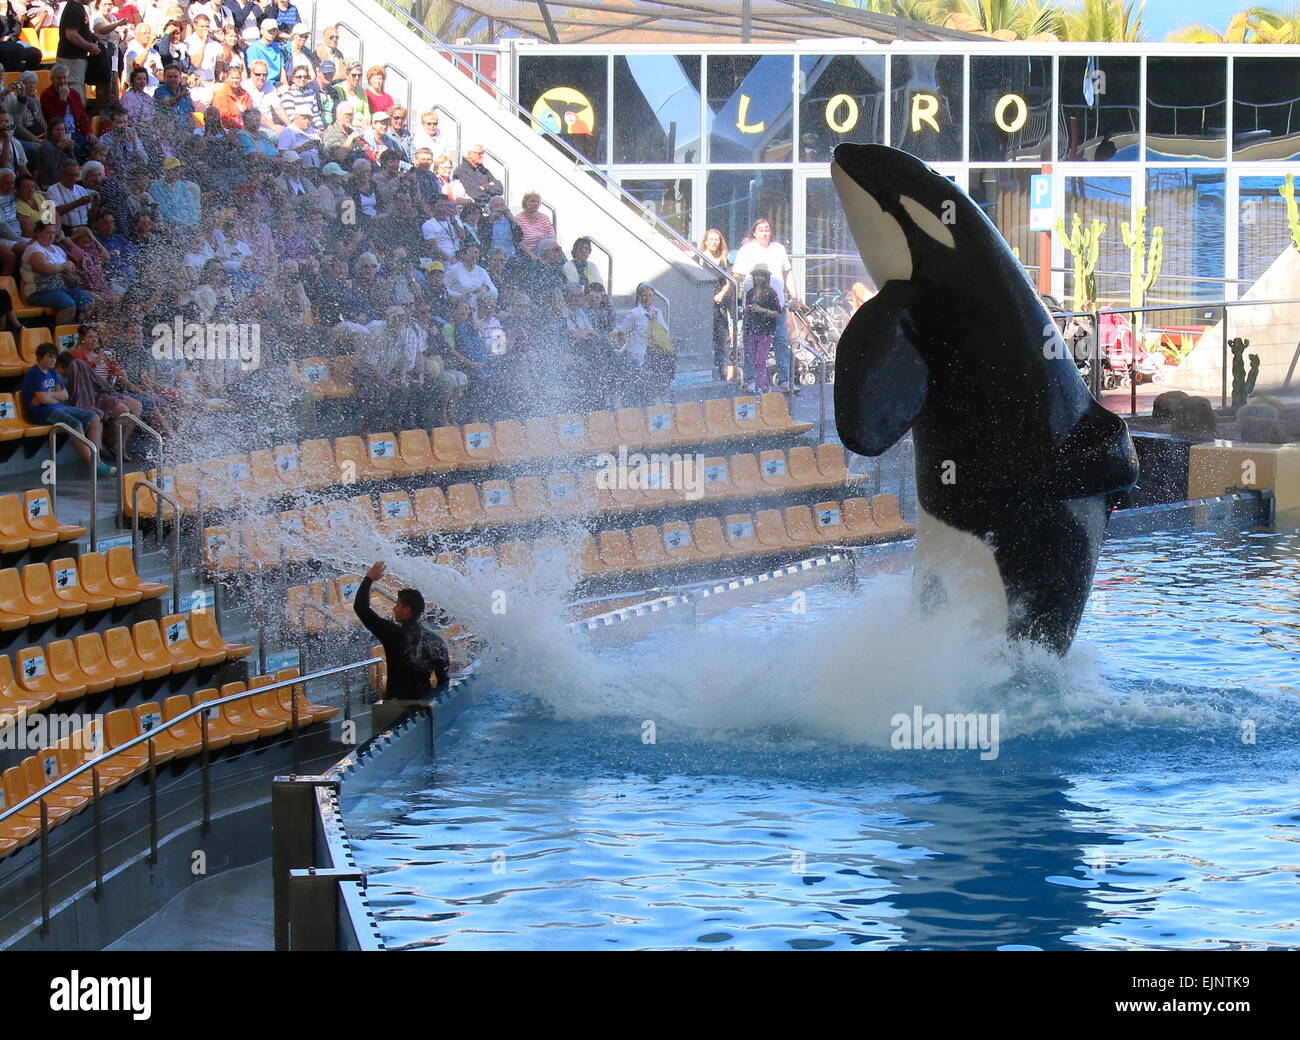 Orca whale Morgan jumping high out of the water at Tenerife's Loro Parque's Orca Show, audience getting splashed Stock Photo